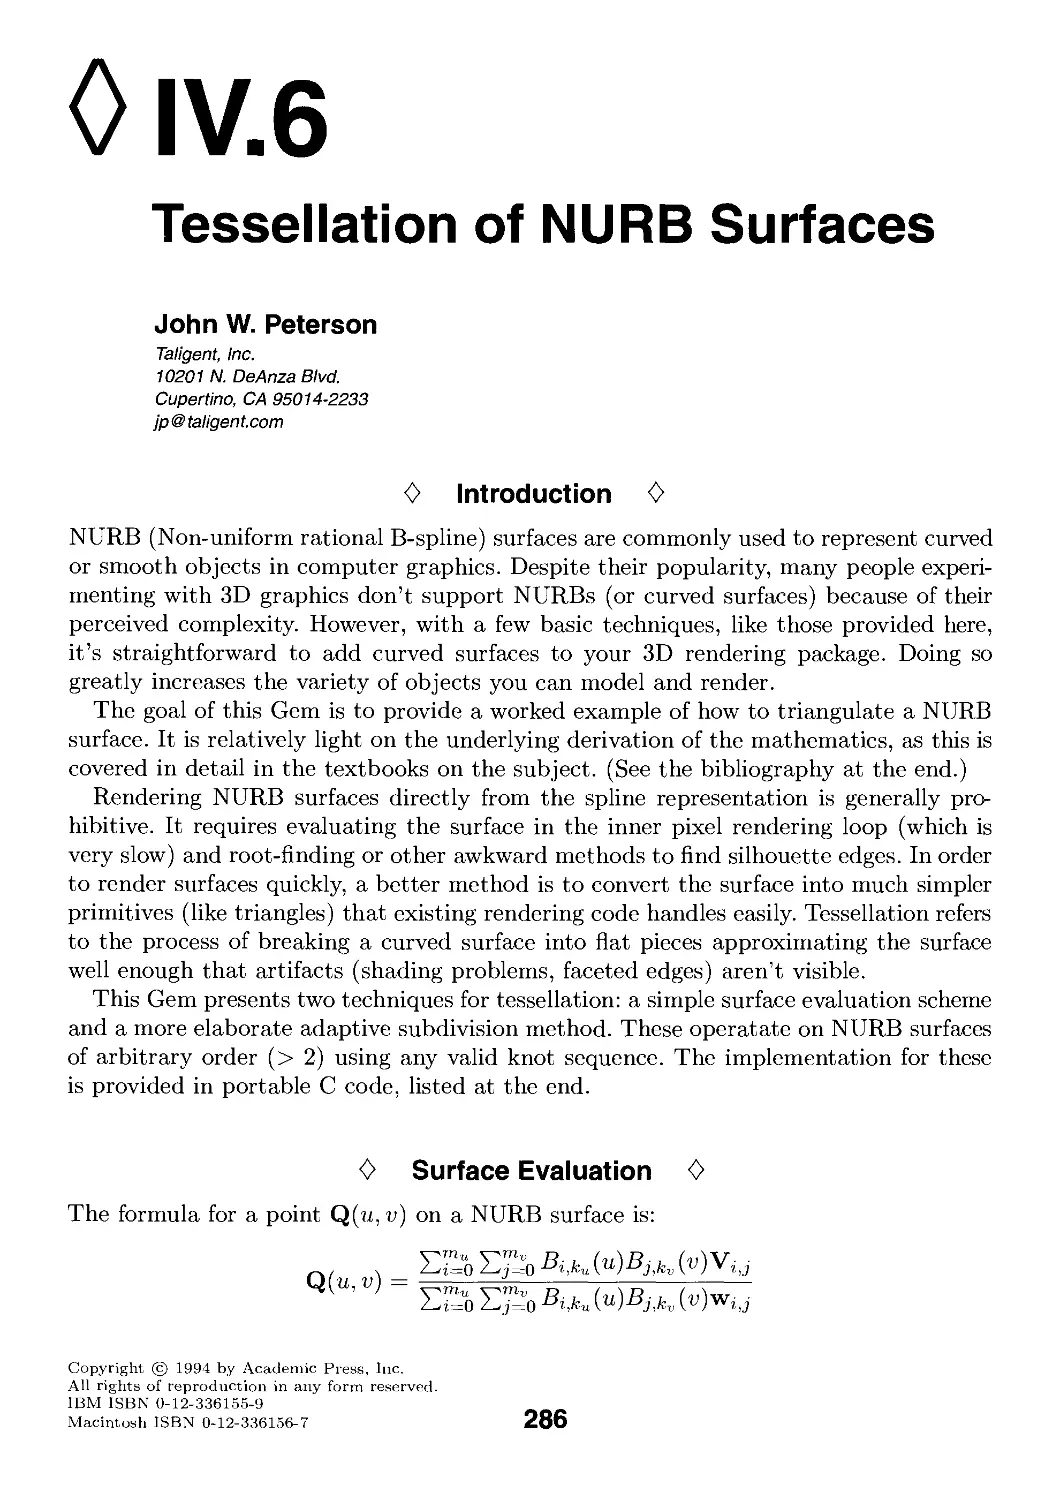 IV.6. Tessellation of NURB Surfaces by John W. Peterson